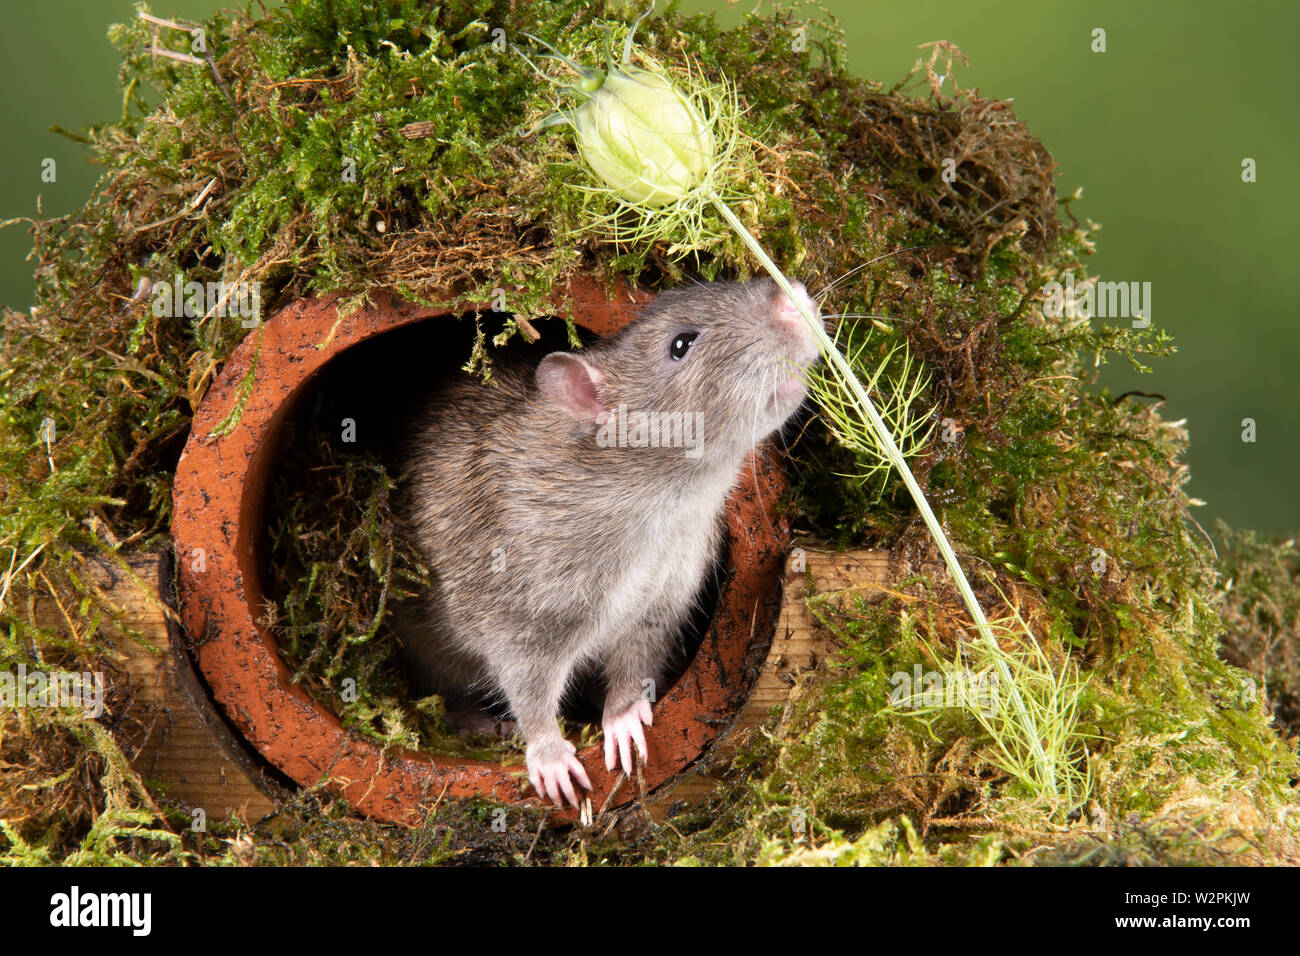 a wild rat in a studio setting emerging from a water pipe Stock Photo